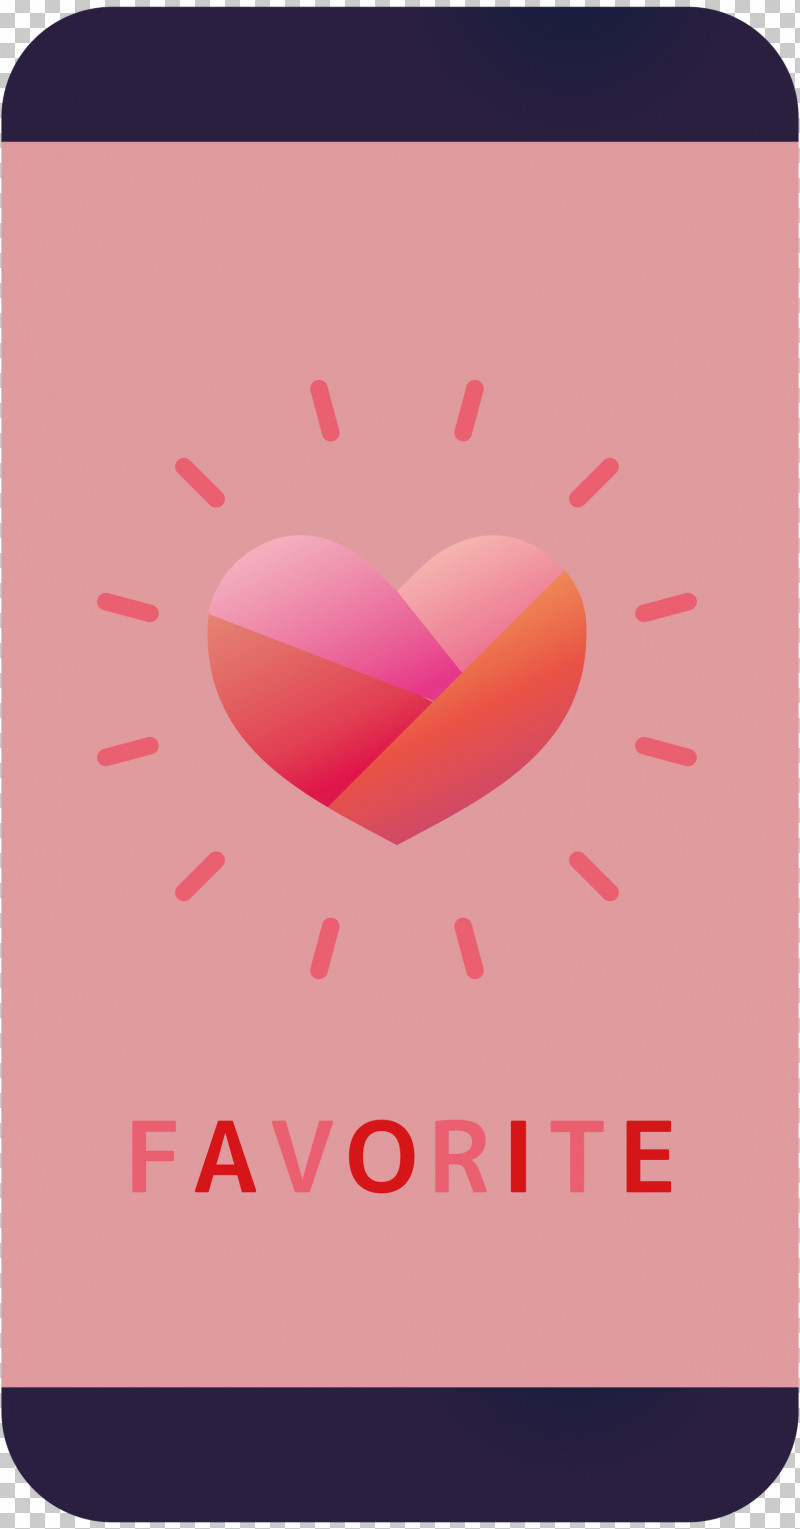 Darling Deary Favorite PNG, Clipart, Darling, Favorite, Favourite, Heart, M095 Free PNG Download